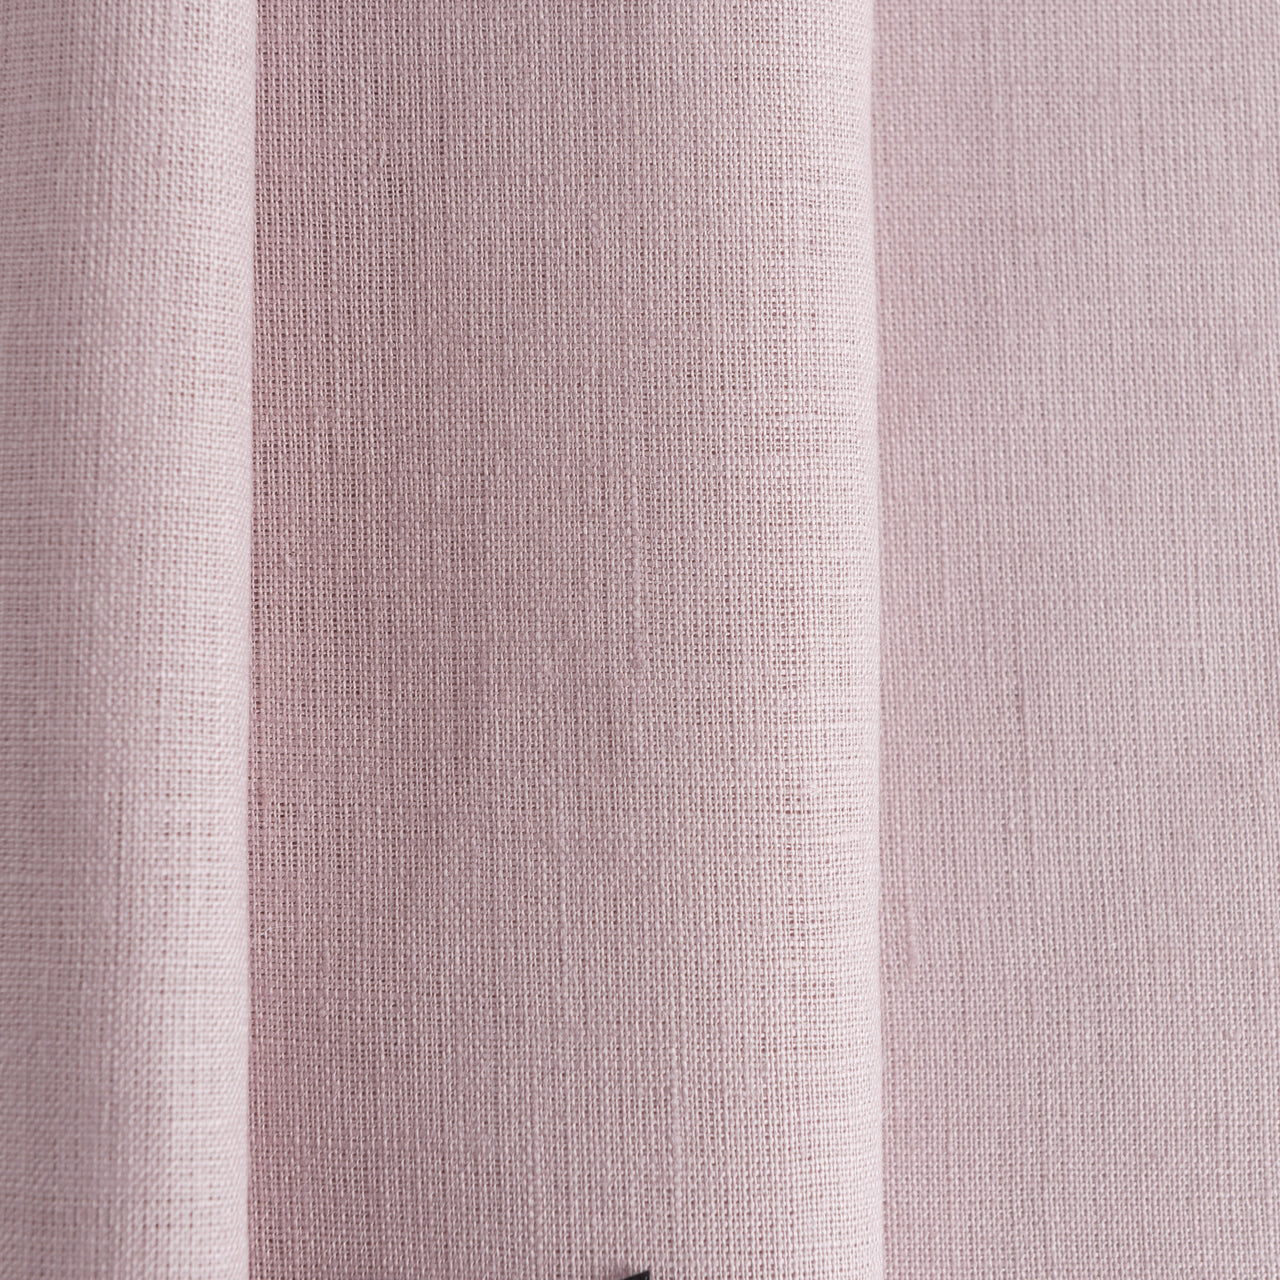 Dusty Pink S-fold Linen Curtain Panel - Suitable for Rings and Hooks or Track, Color: dusty pink